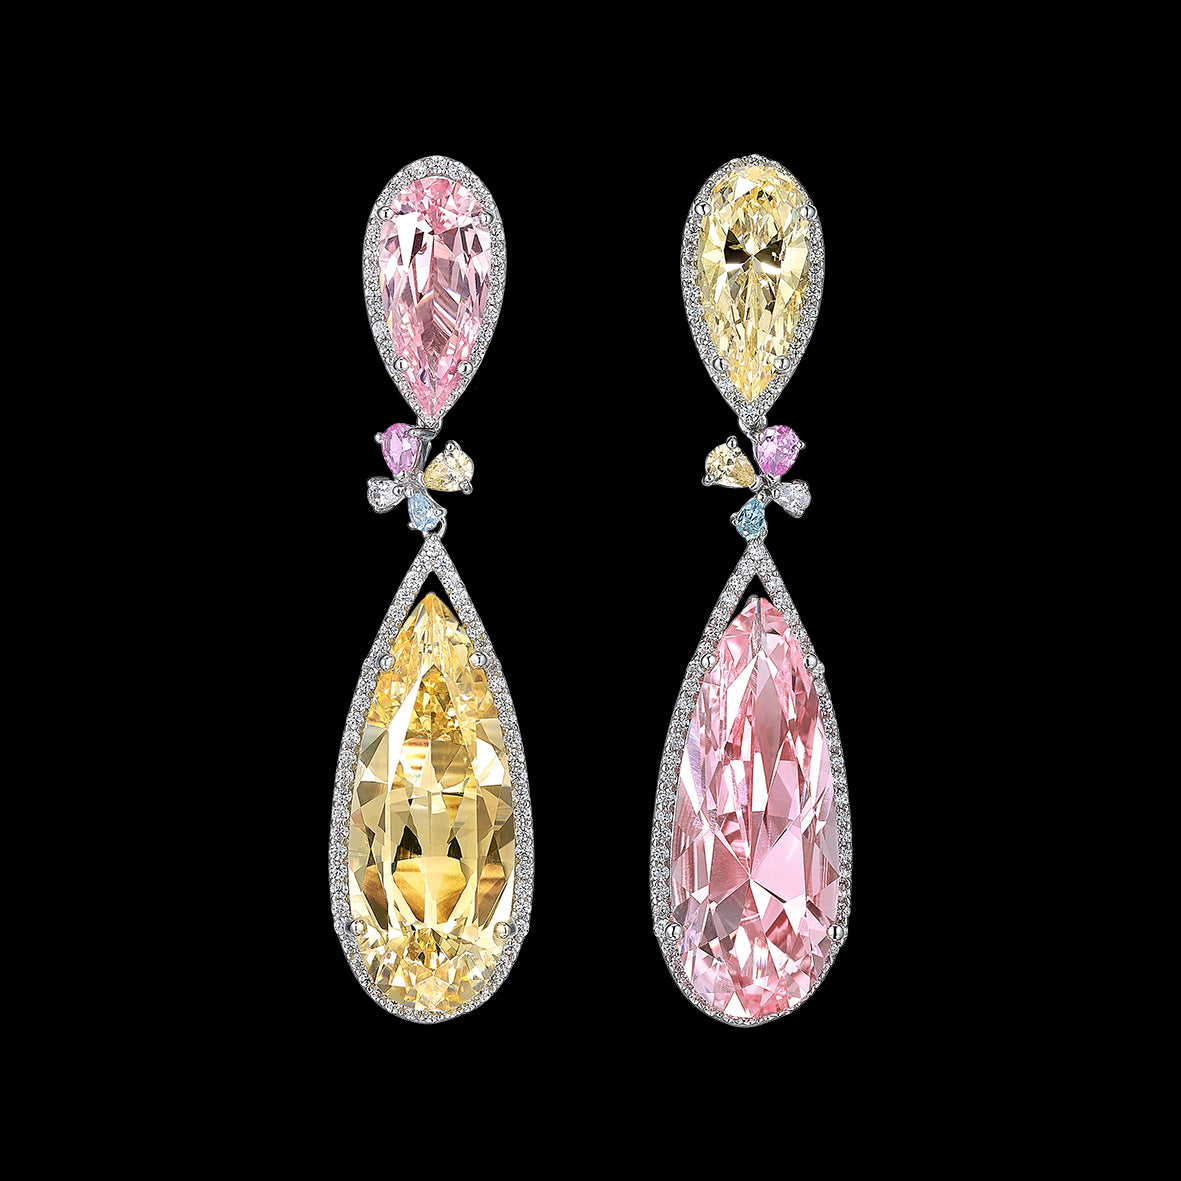 Candy Papillon Earrings, Earrings, Anabela Chan Joaillerie - Fine jewelry with laboratory grown and created gemstones hand-crafted in the United Kingdom. Anabela Chan Joaillerie is the first fine jewellery brand in the world to champion laboratory-grown and created gemstones with high jewellery design, artisanal craftsmanship and a focus on ethical and sustainable innovations.